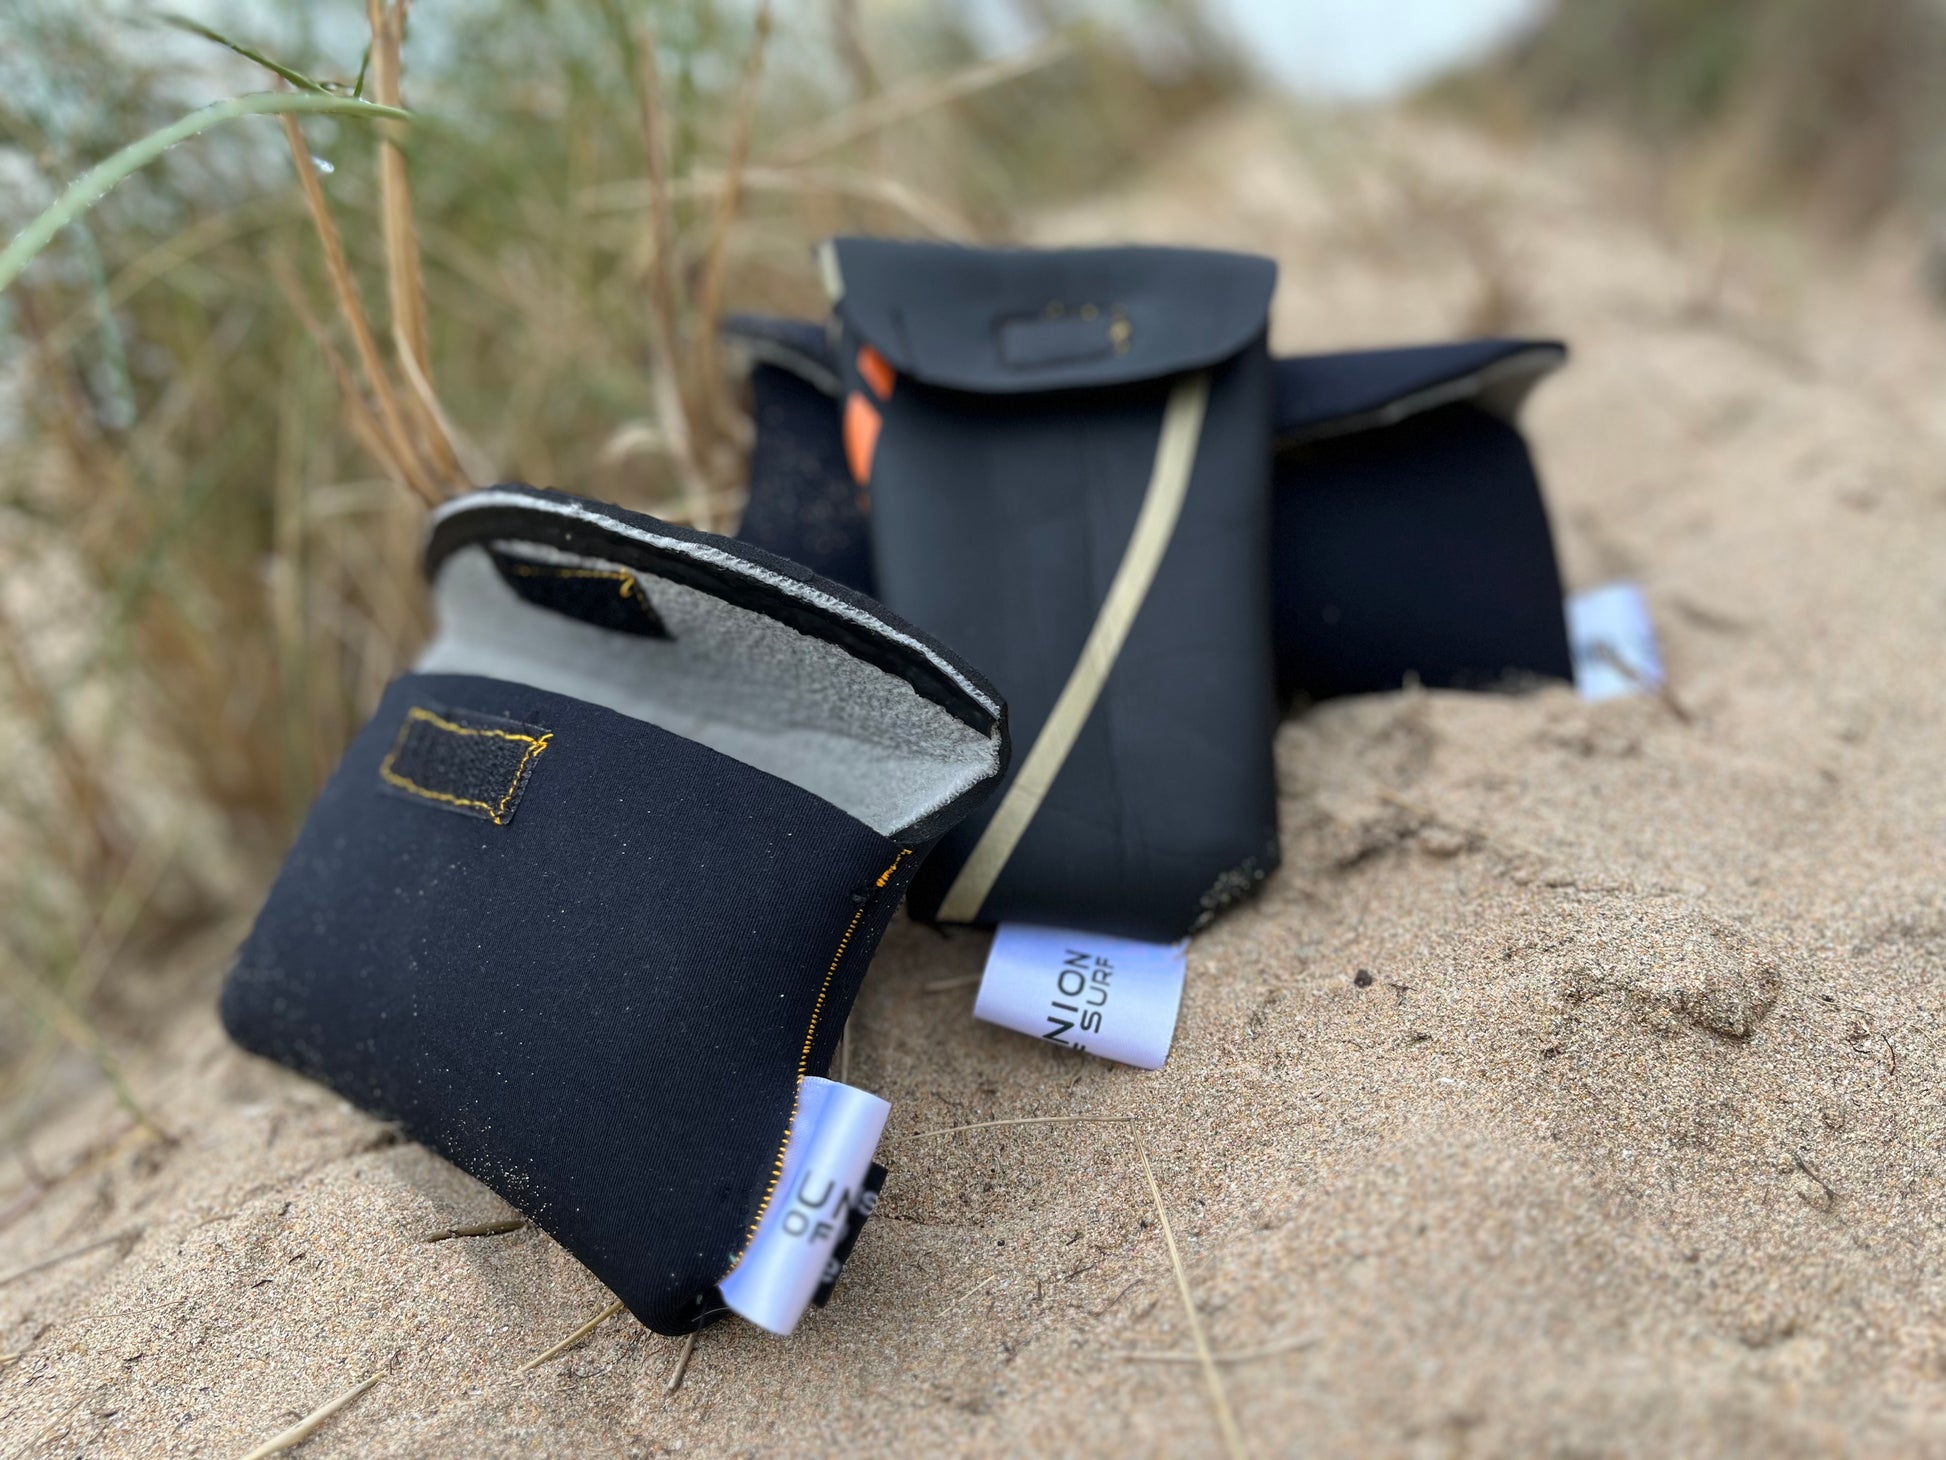 Wetsuit- Sunglasses CaseProtect your eyewear in style with our handmade I Used to Be a Wetsuit- Sunglasses Case. Crafted from recycled wetsuits, we're making sustainability cool and reducin